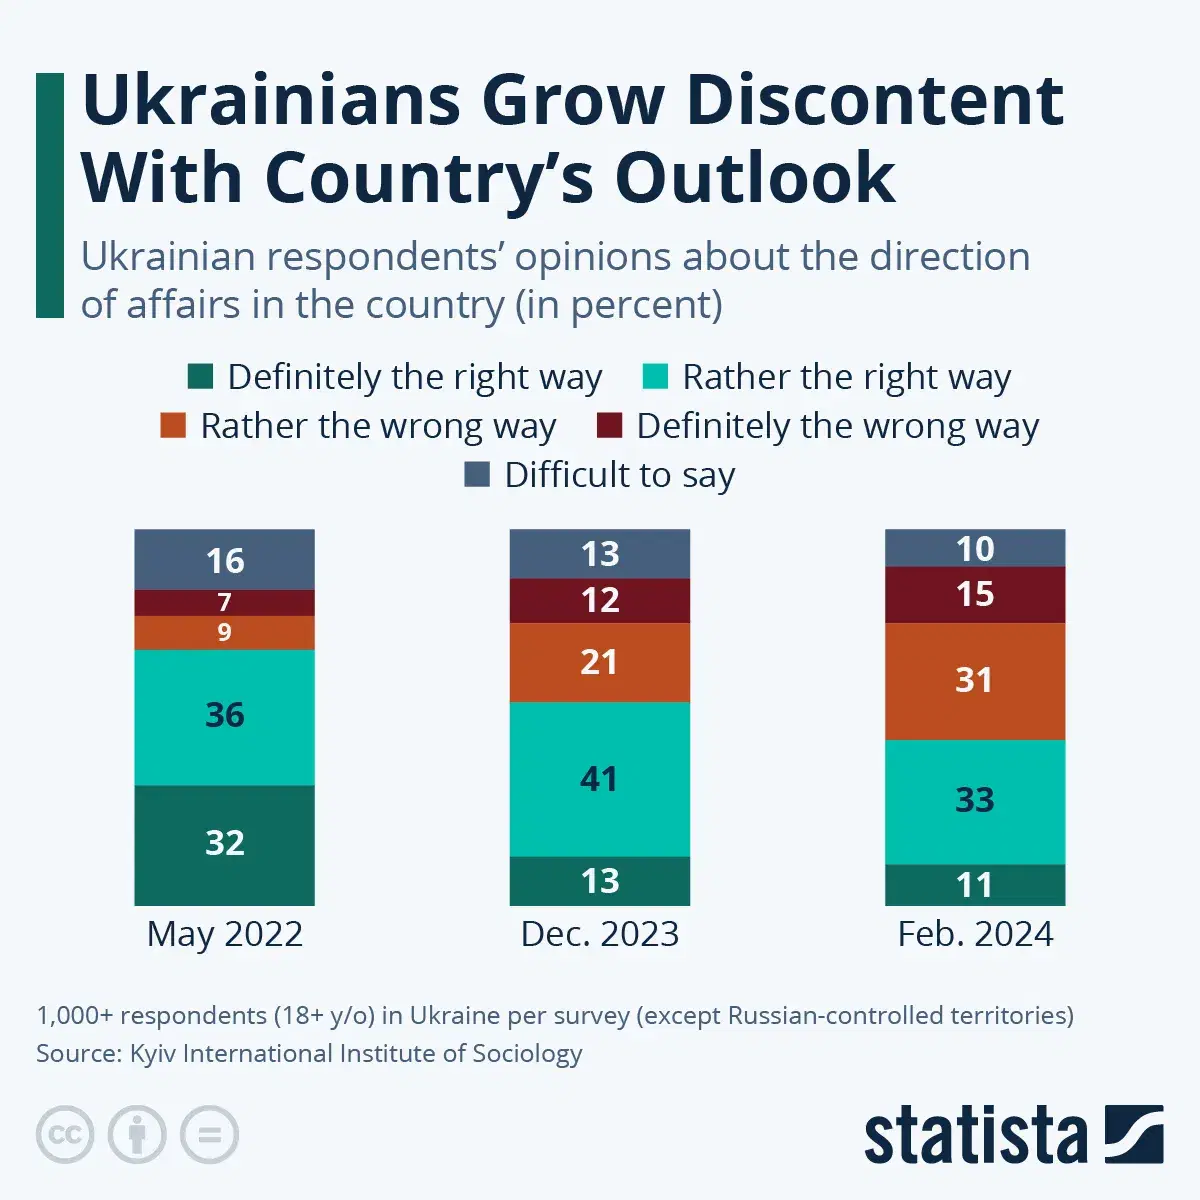 Ukrainians' Growing Discontent With the Country's Outlook